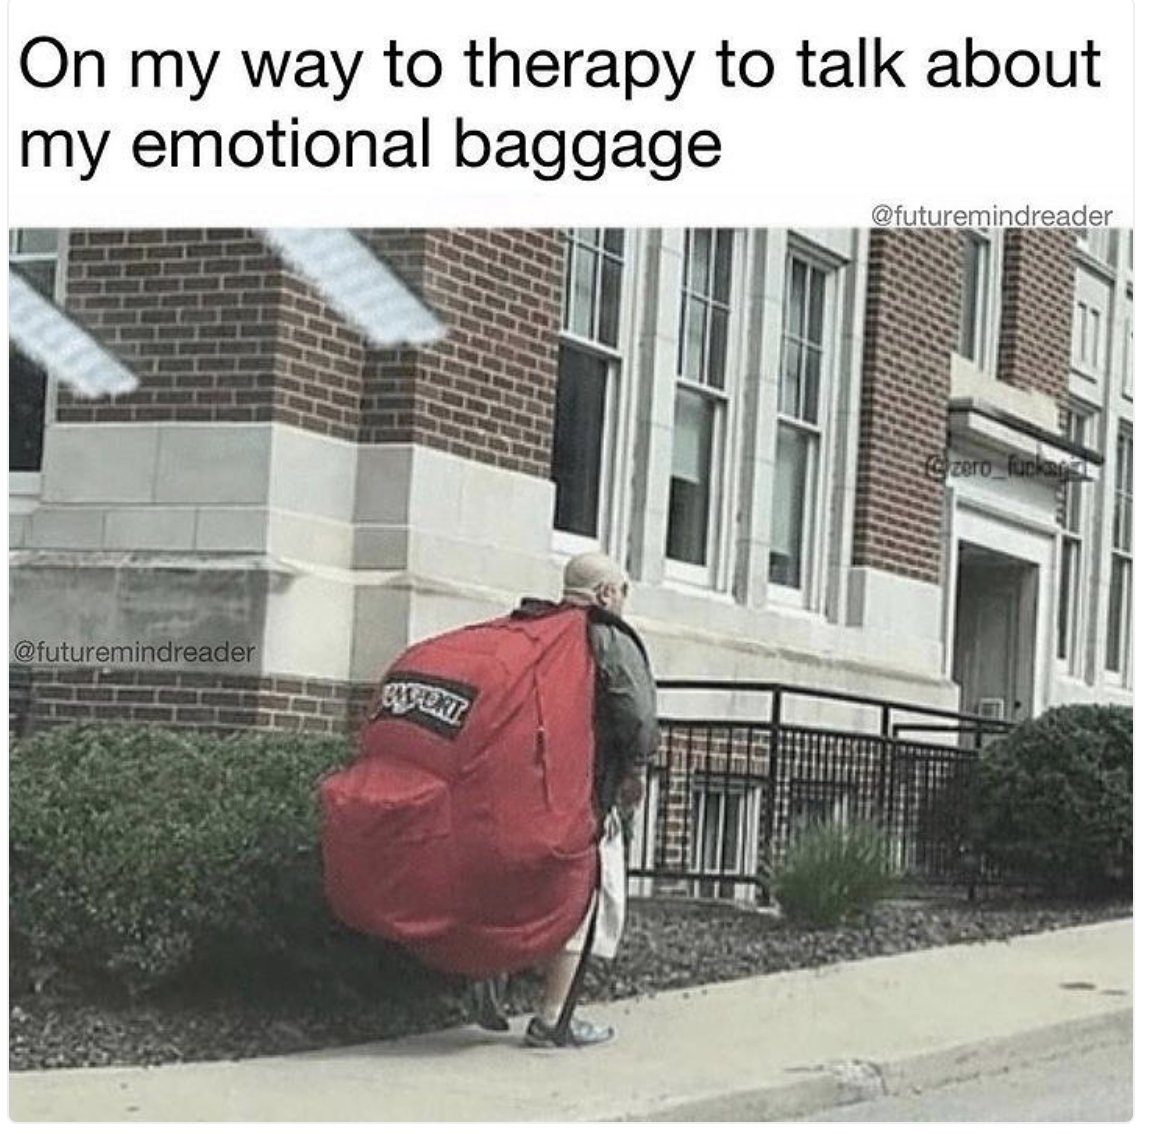 On my way to #therapy #headshrinking #shrink to talk about #emotional #emotionalbaggage #baggage